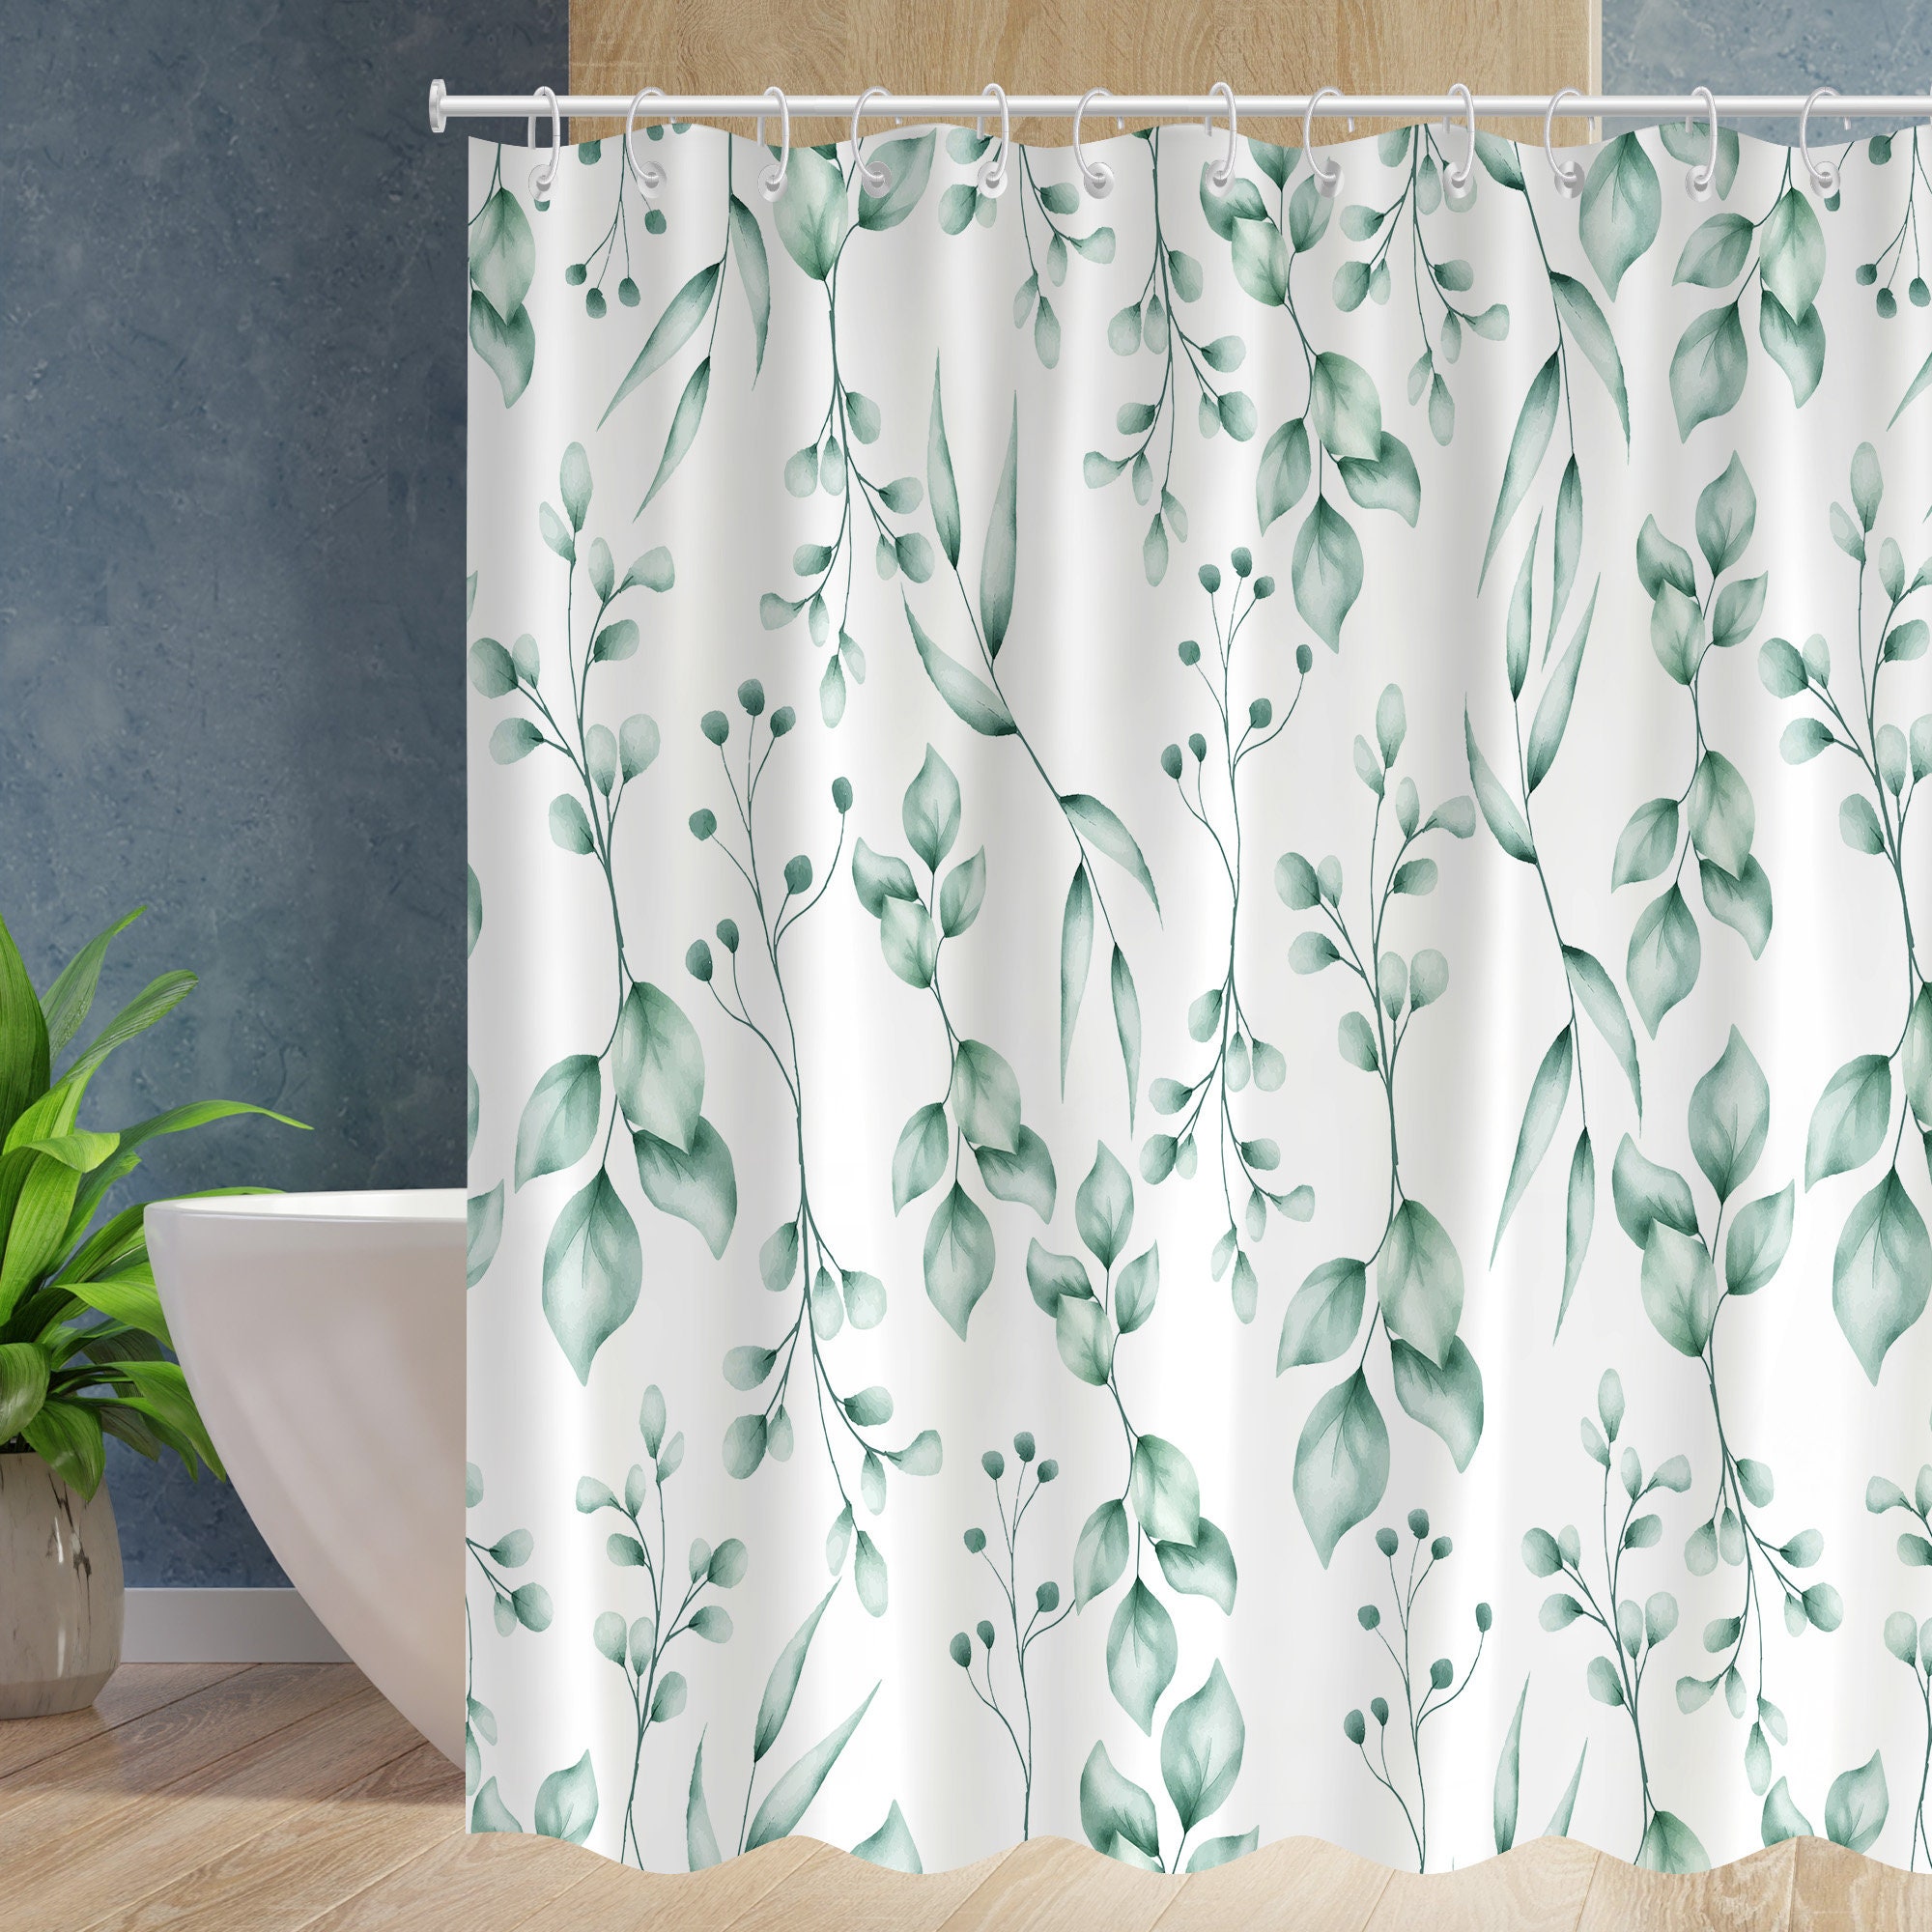 Coxila Tropical Leaves Plant Shower Curtain 36x72 inch Green White ...